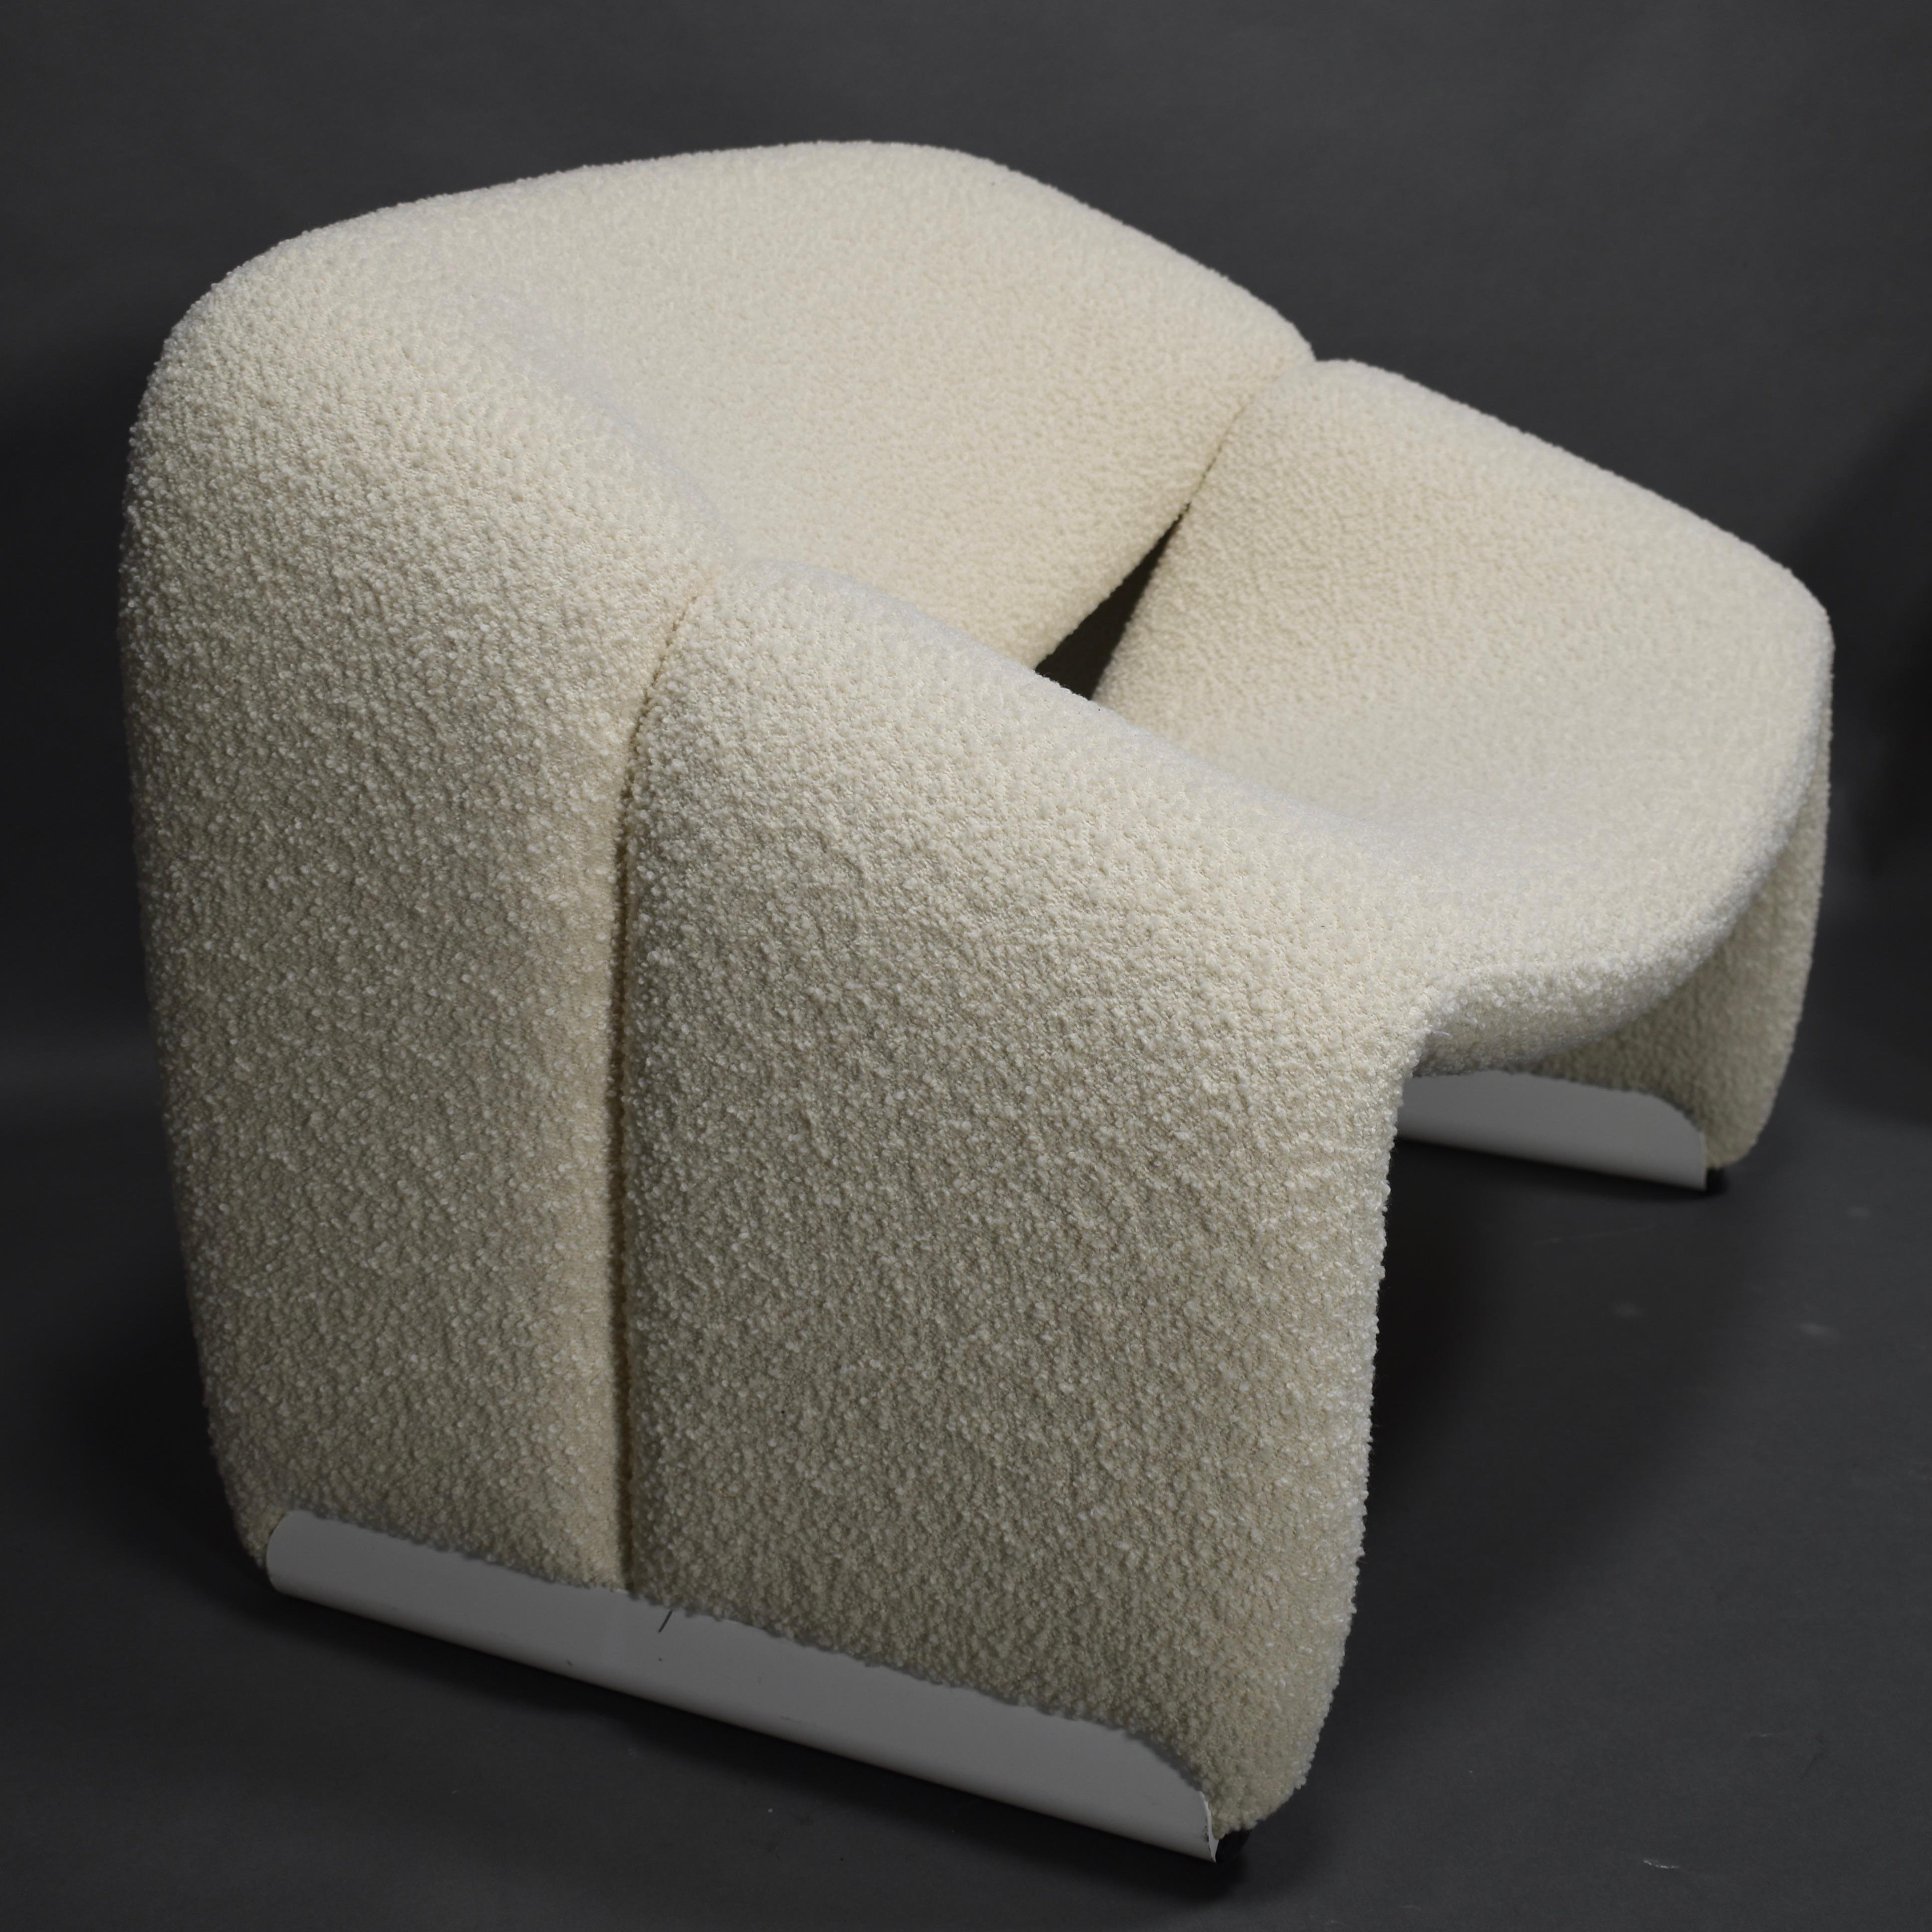 F598 ‘Groovy’ 'M' lounge chair by Pierre Paulin for Artifort in new bouclé wool/cotton fabric from Paris, France.
Price is per chair
We have more chairs available.
The chair has been new upholstered in a beautiful off-white bouclé wool/cotton